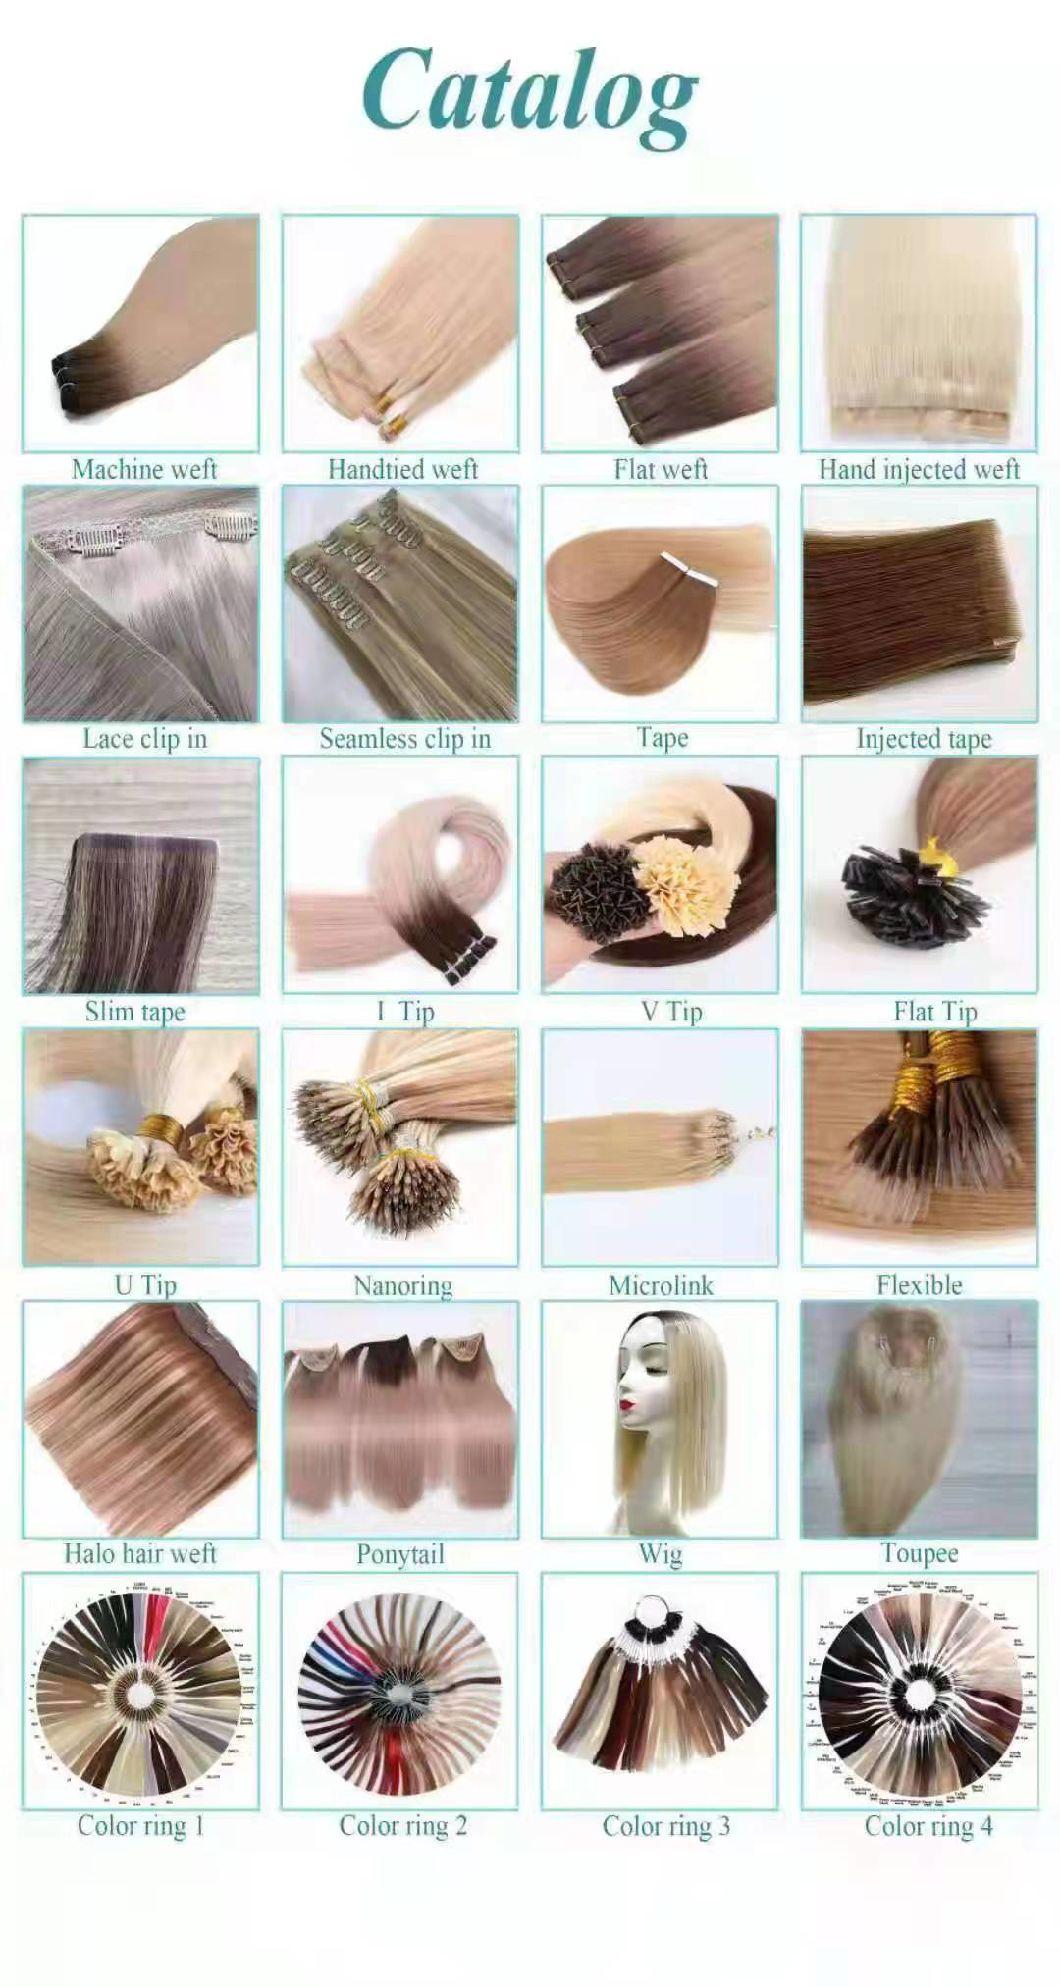 Full Cuticle Double Drawn Remy Hand Tied Weft, Factory Natural Soft 100% Human Hair Products.